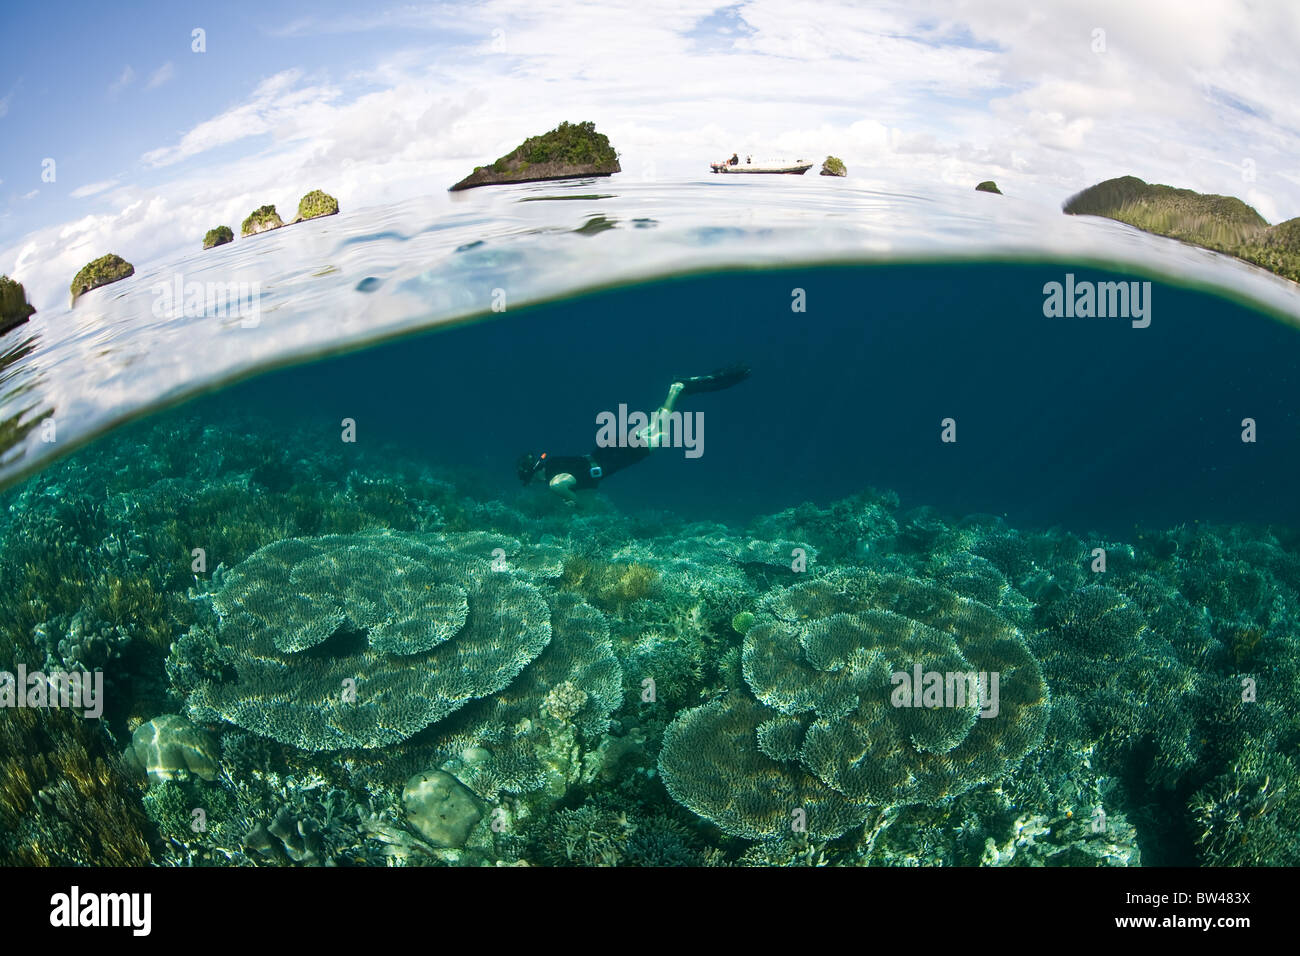 A snorkeler swims above a diverse coral reef in a remote part of eastern Indonesia where marine life is at its most diverse. Stock Photo